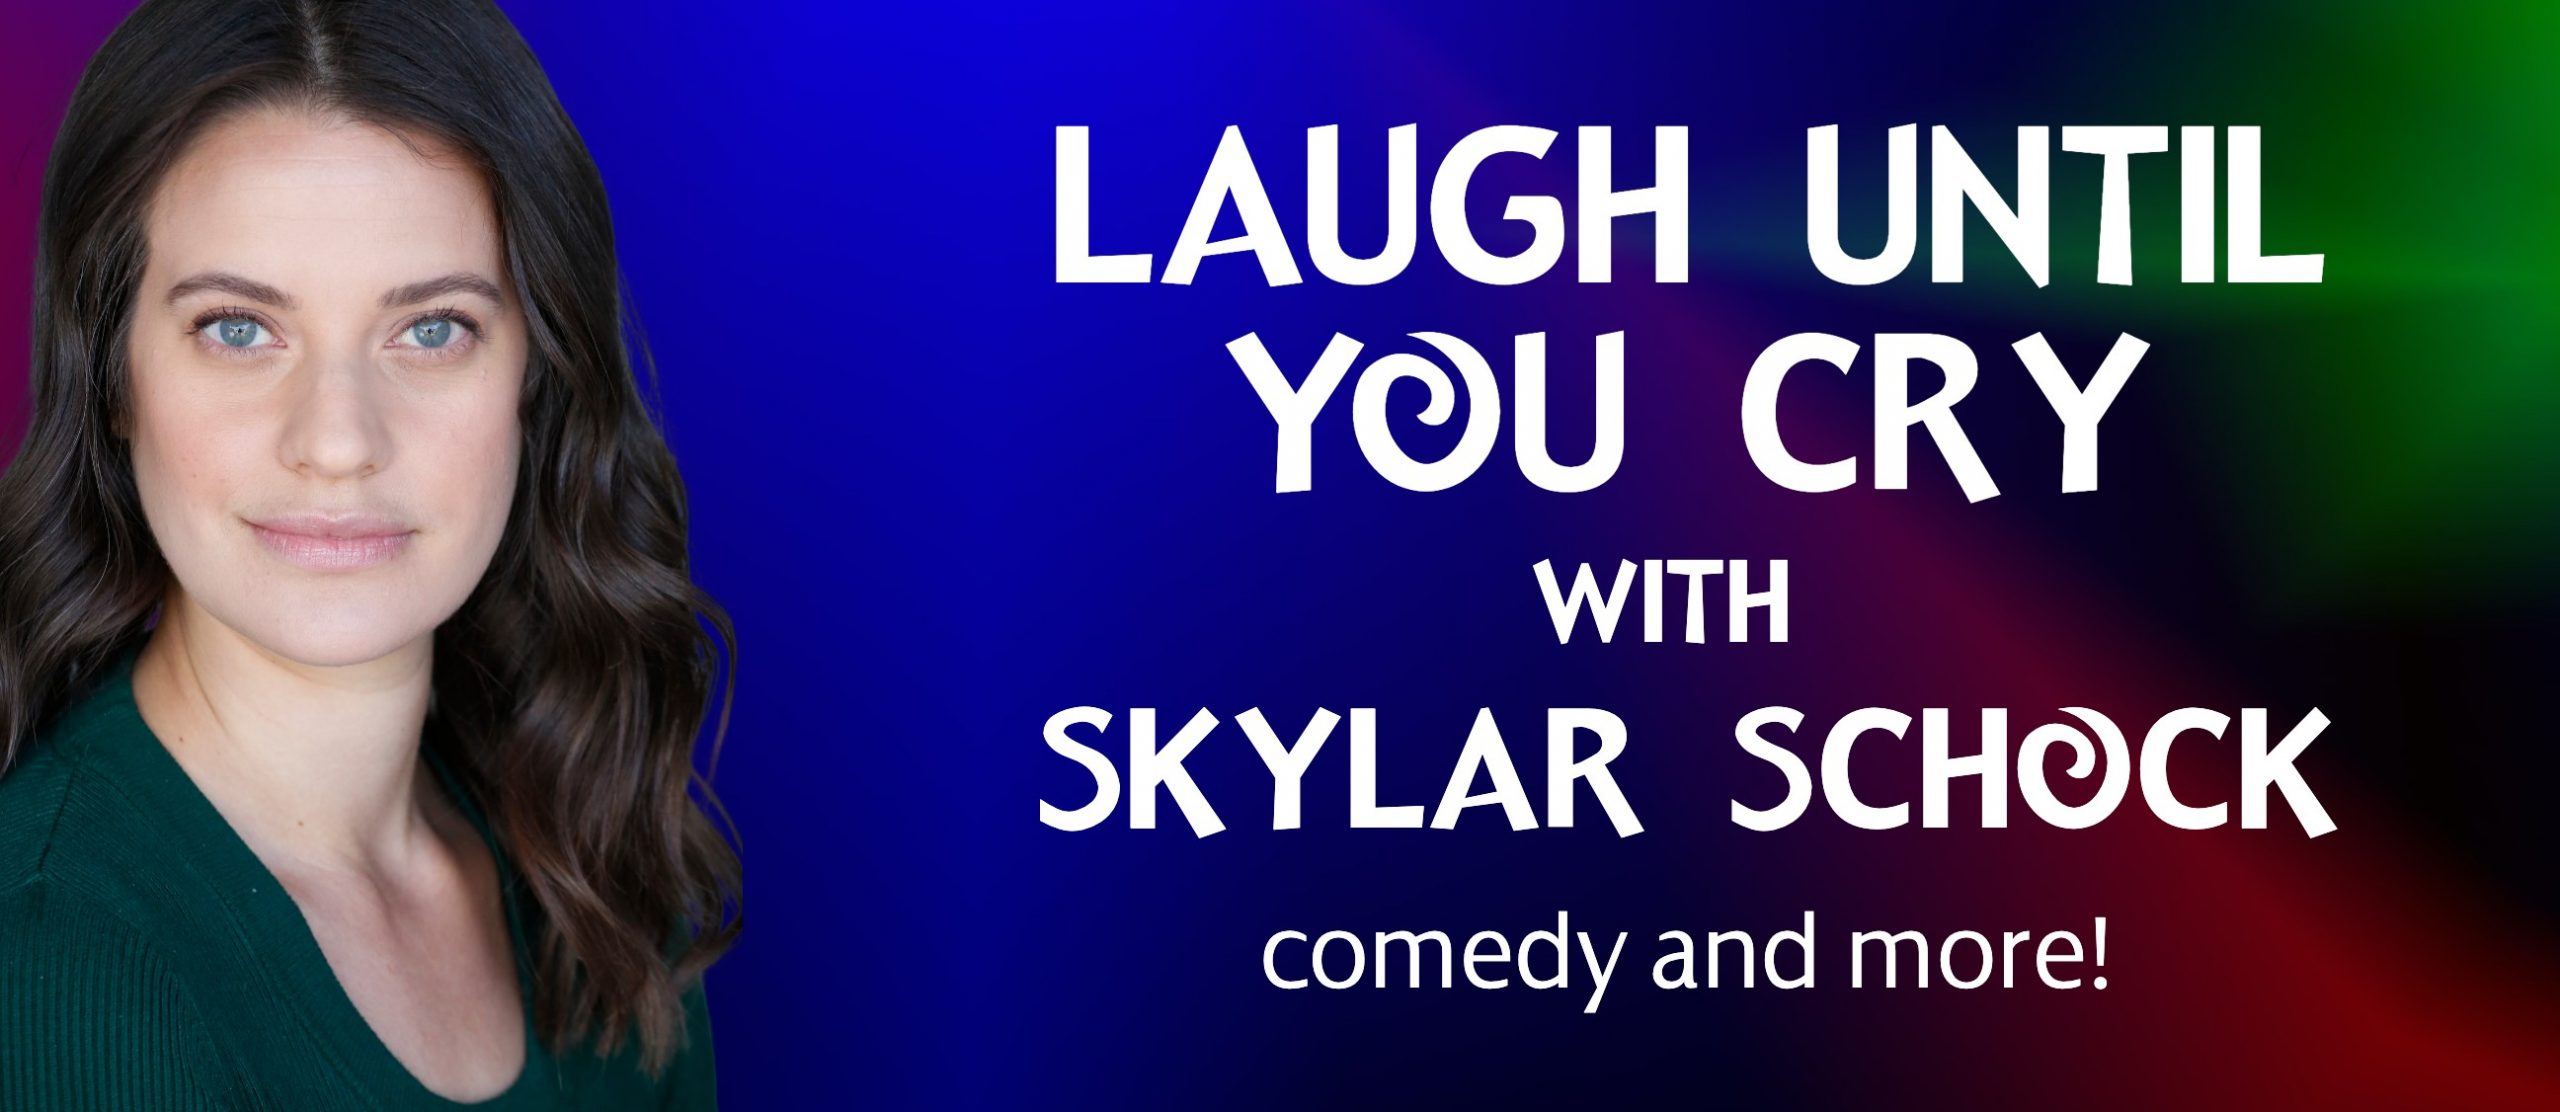 Laugh Until You Cry with Skylar Schock